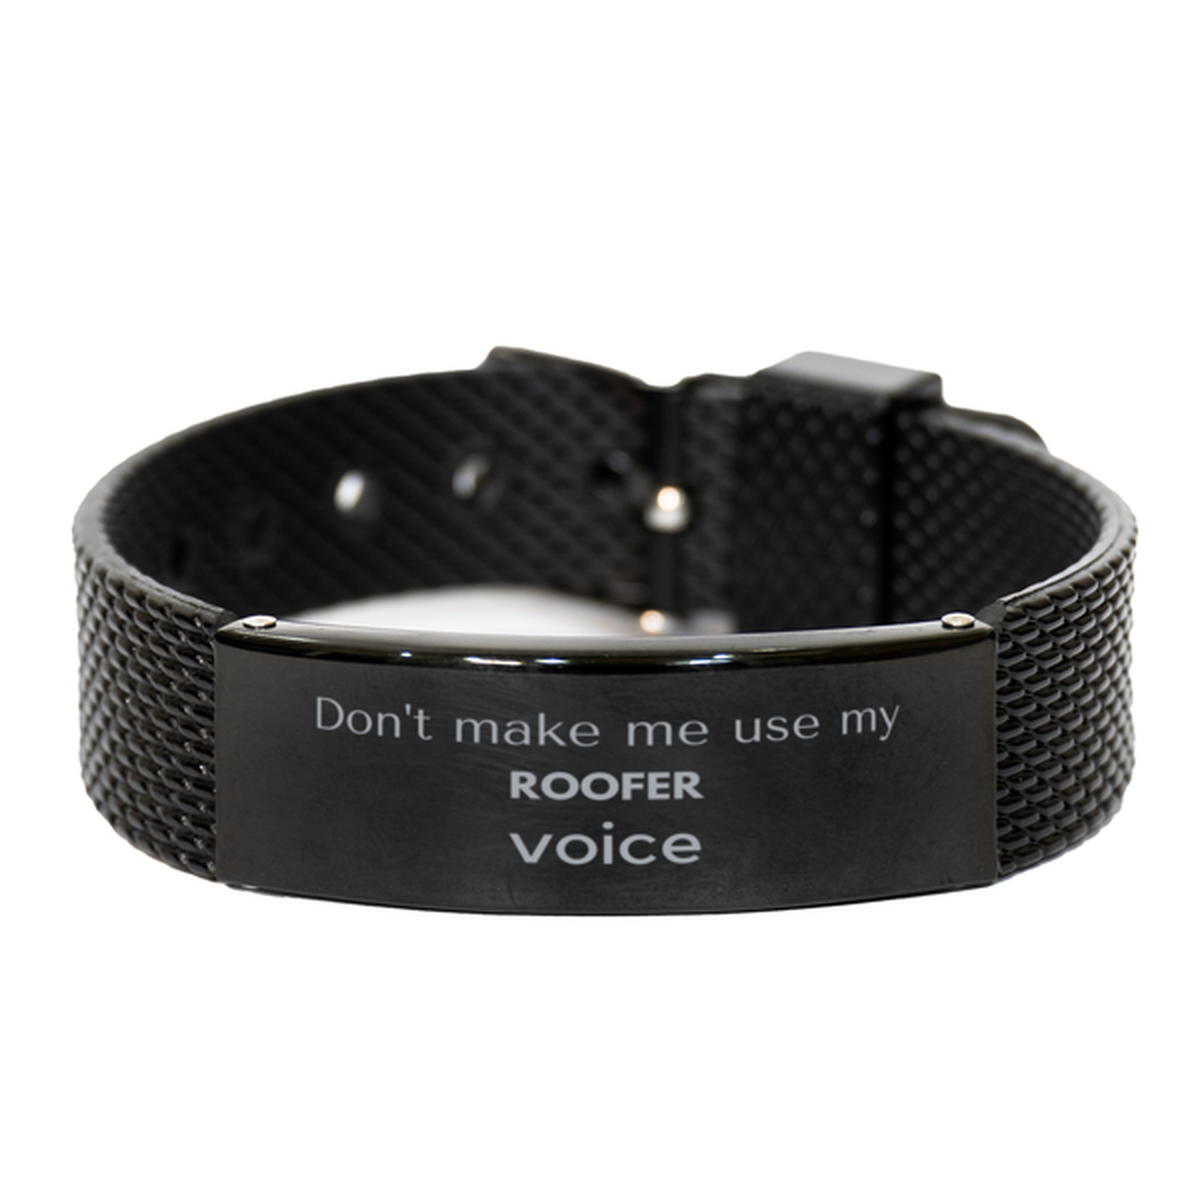 Don't make me use my Roofer voice, Sarcasm Roofer Gifts, Christmas Roofer Black Shark Mesh Bracelet Birthday Unique Gifts For Roofer Coworkers, Men, Women, Colleague, Friends